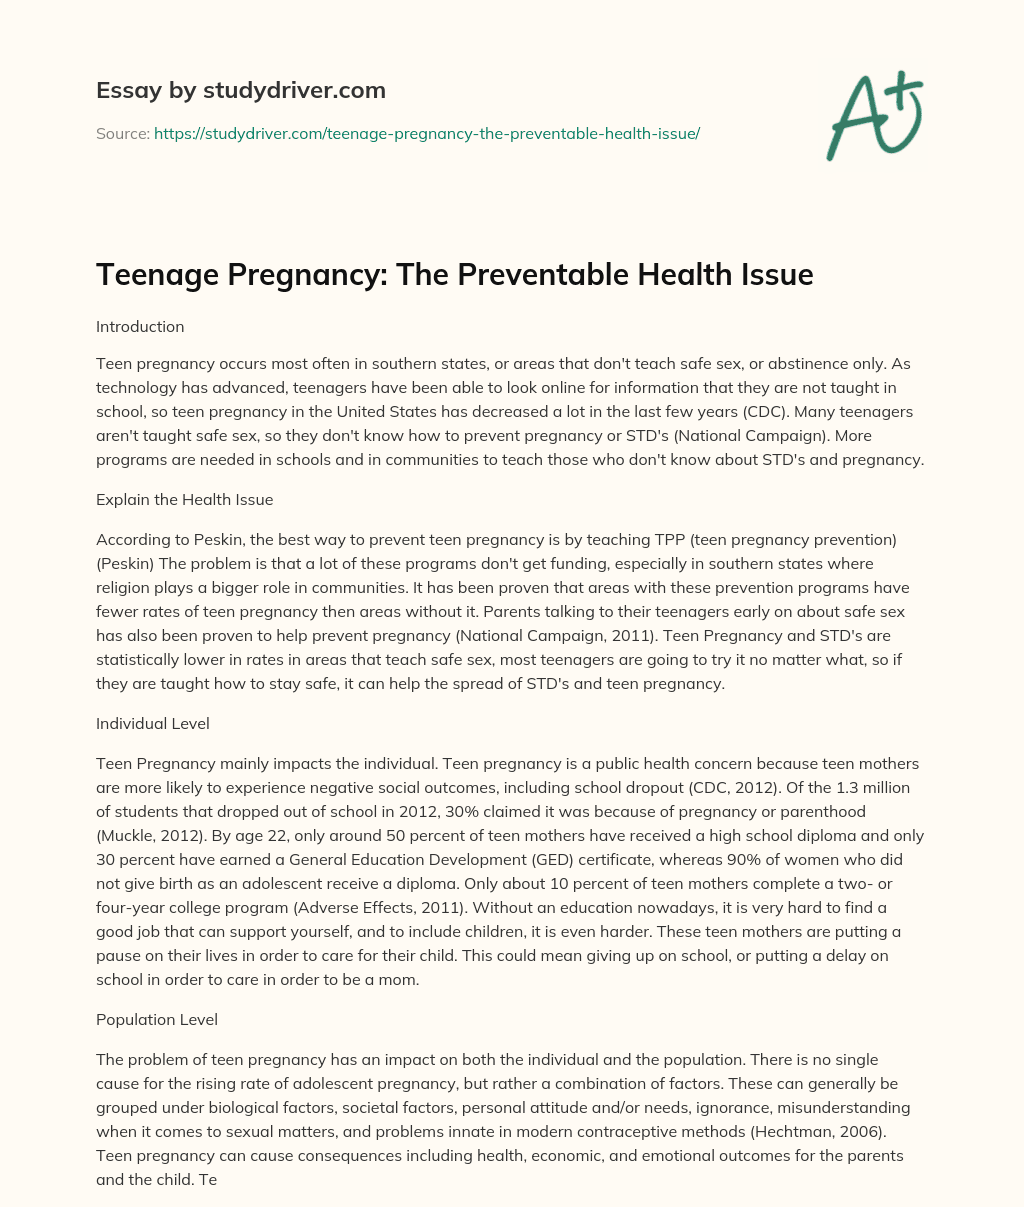 Teenage Pregnancy: the Preventable Health Issue essay